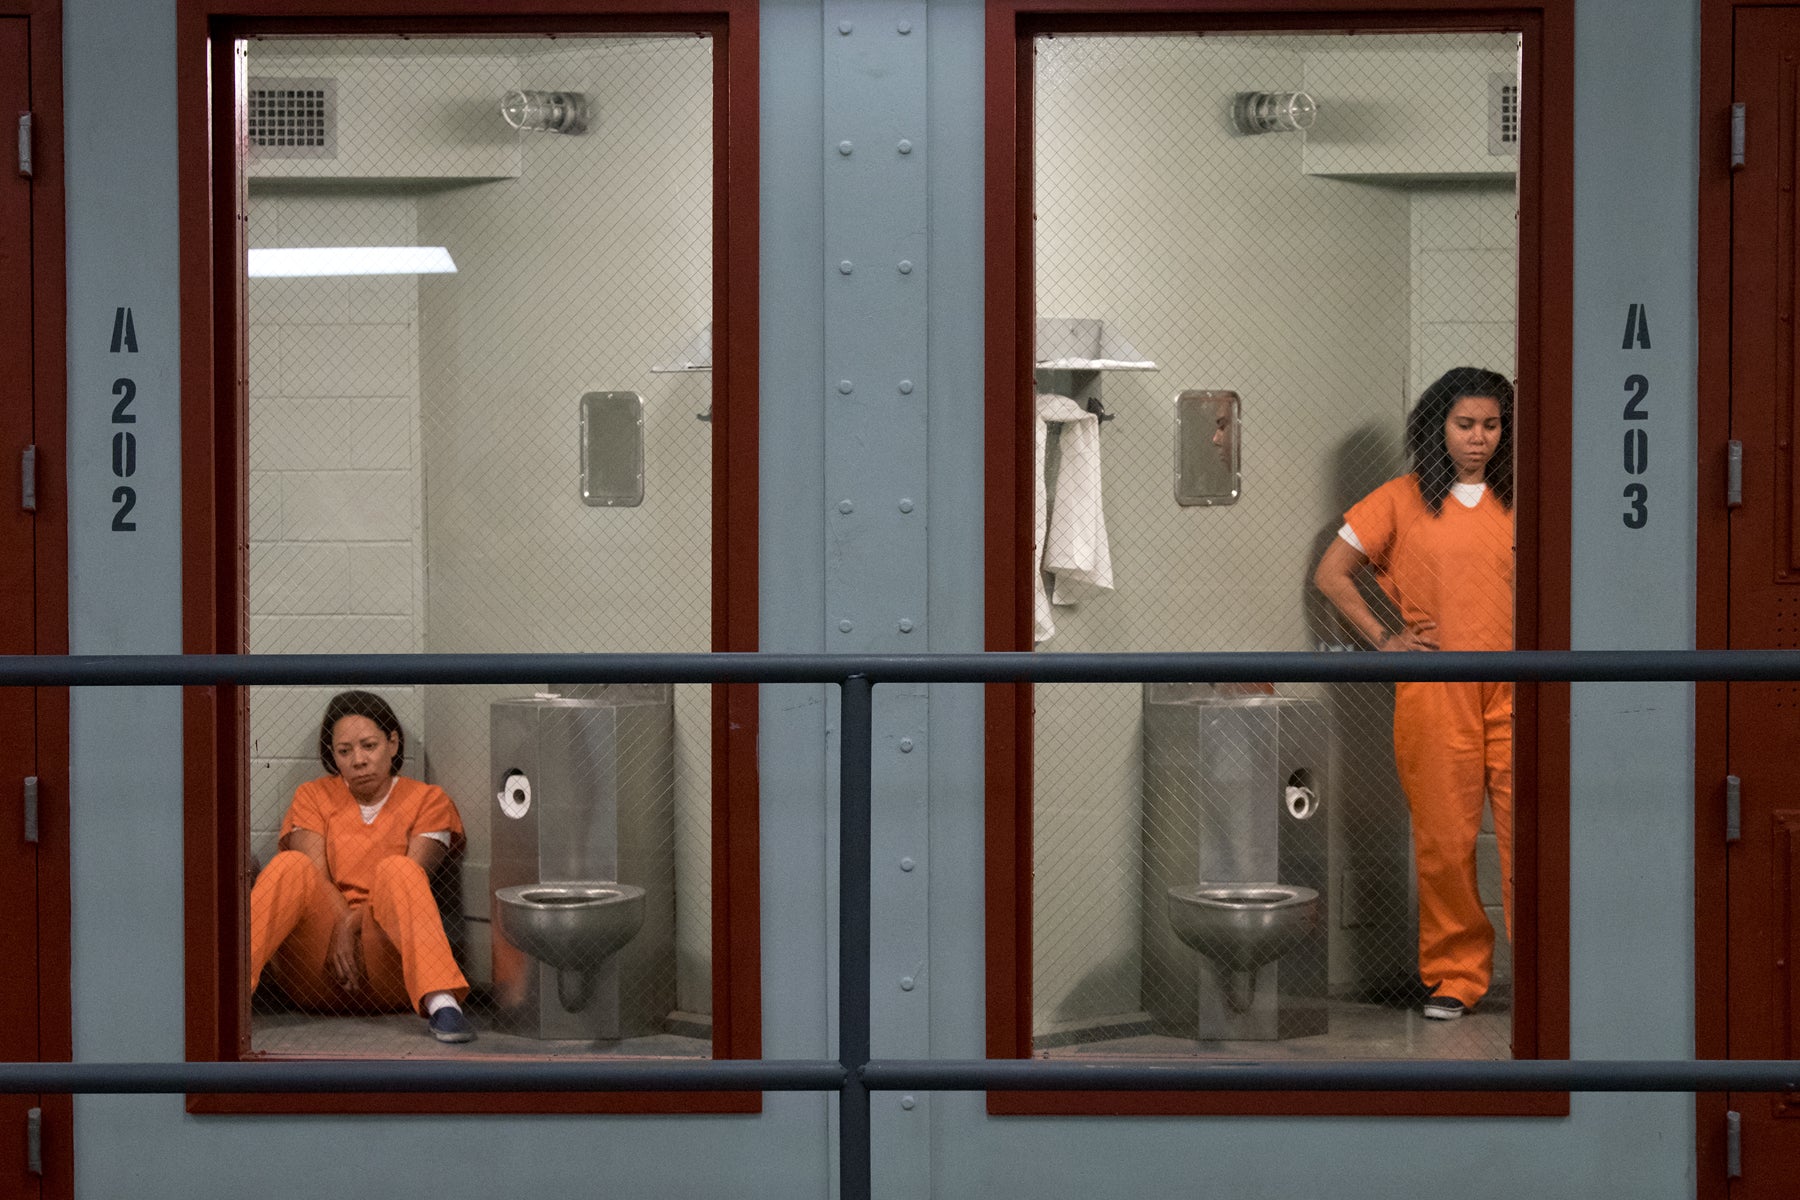 Gloria Mendoza and Maria Ruiz, looking sullen, occupy side-by-side prison cells in an episode of Orange Is the New Black.